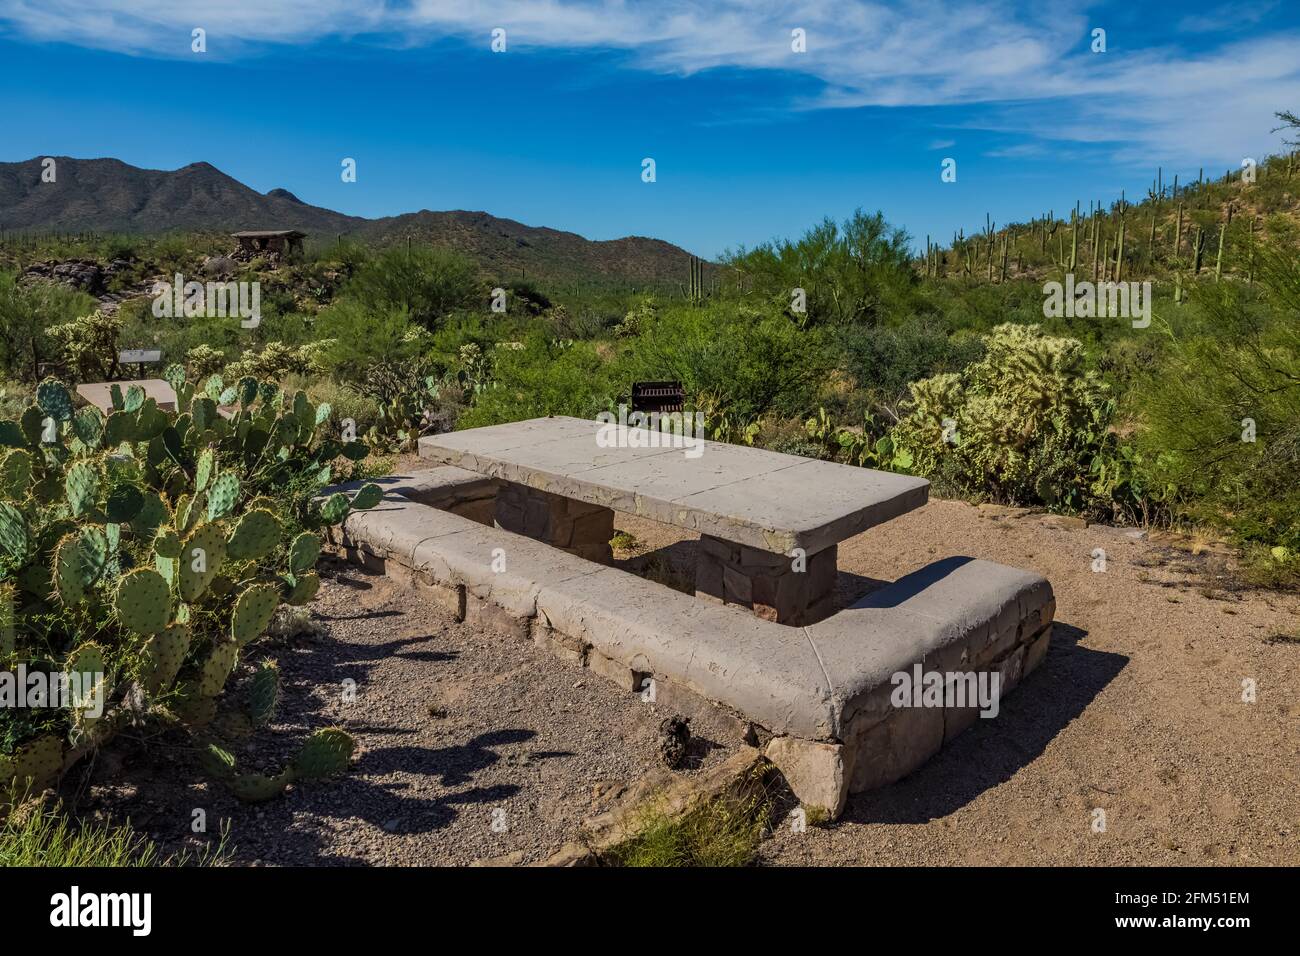 Picnic table in the Ez-Kim-In-Zin Picnic Area built by the Civilian Conservation Corps during the Great Depression, Saguaro National Park, Tucson Moun Stock Photo